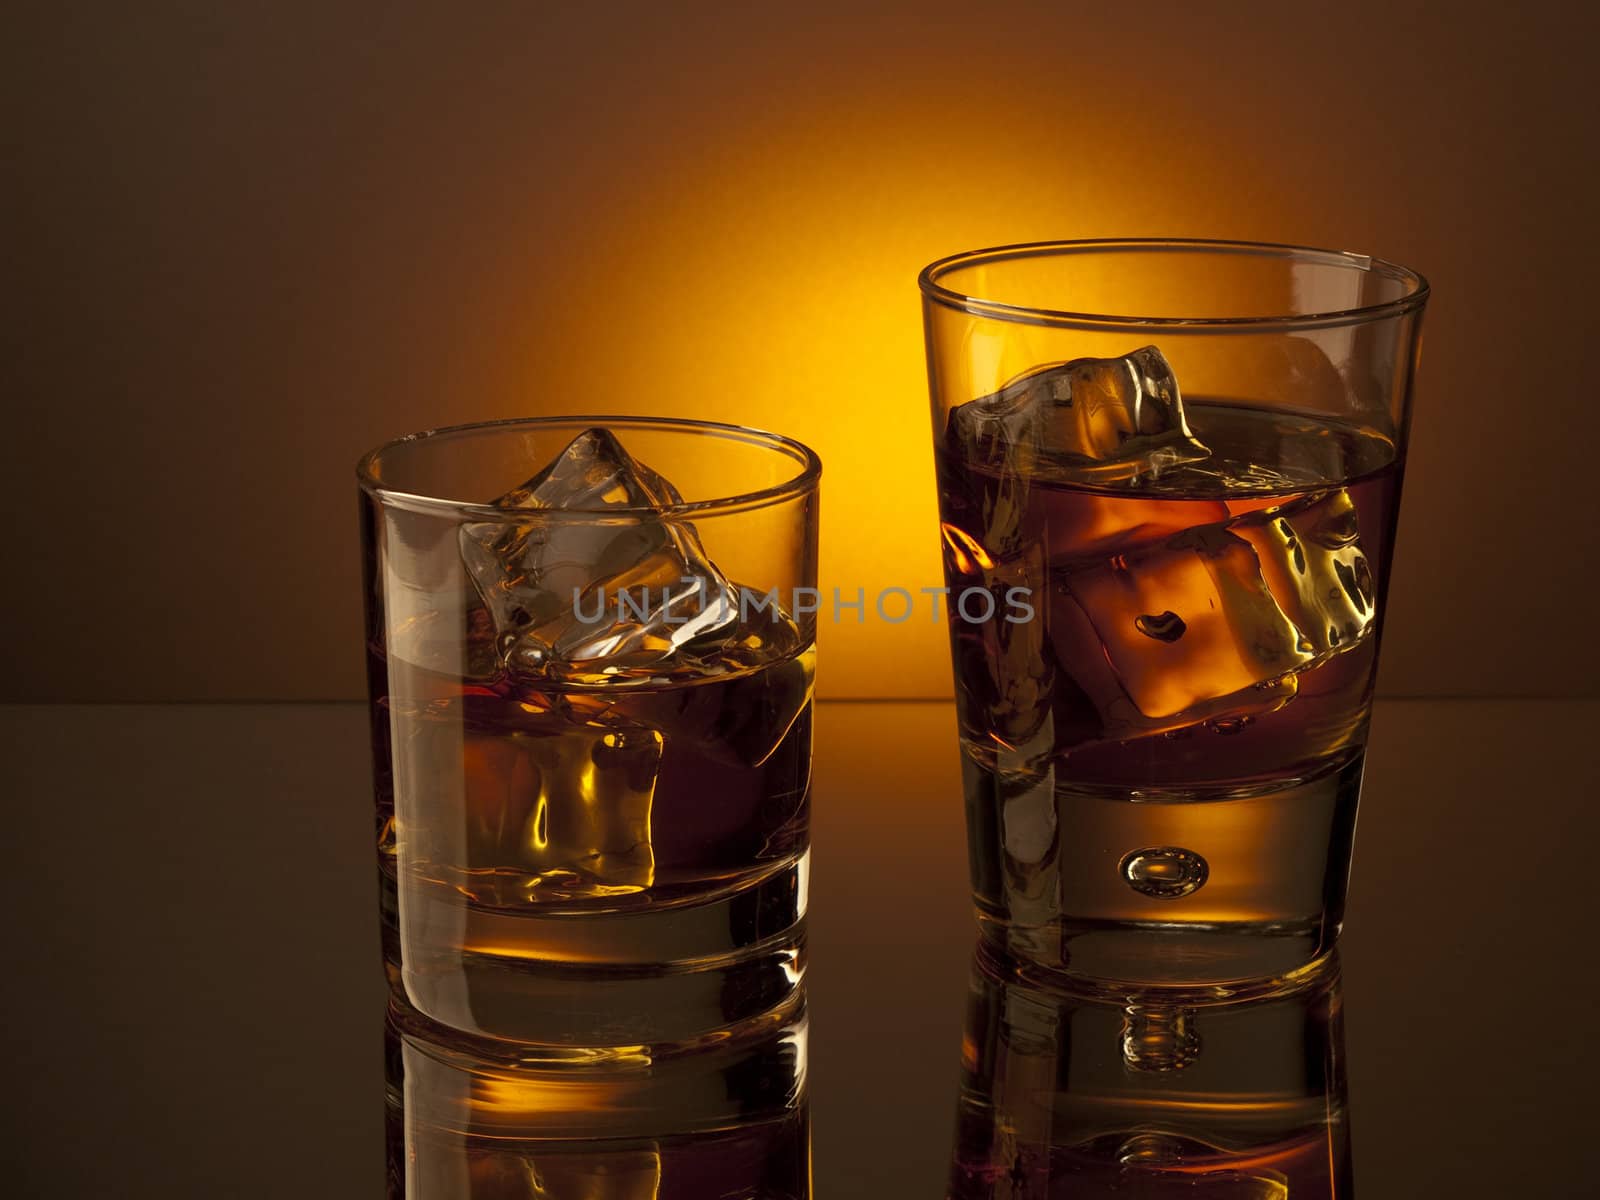 Two glasses of whiskey on the rocks